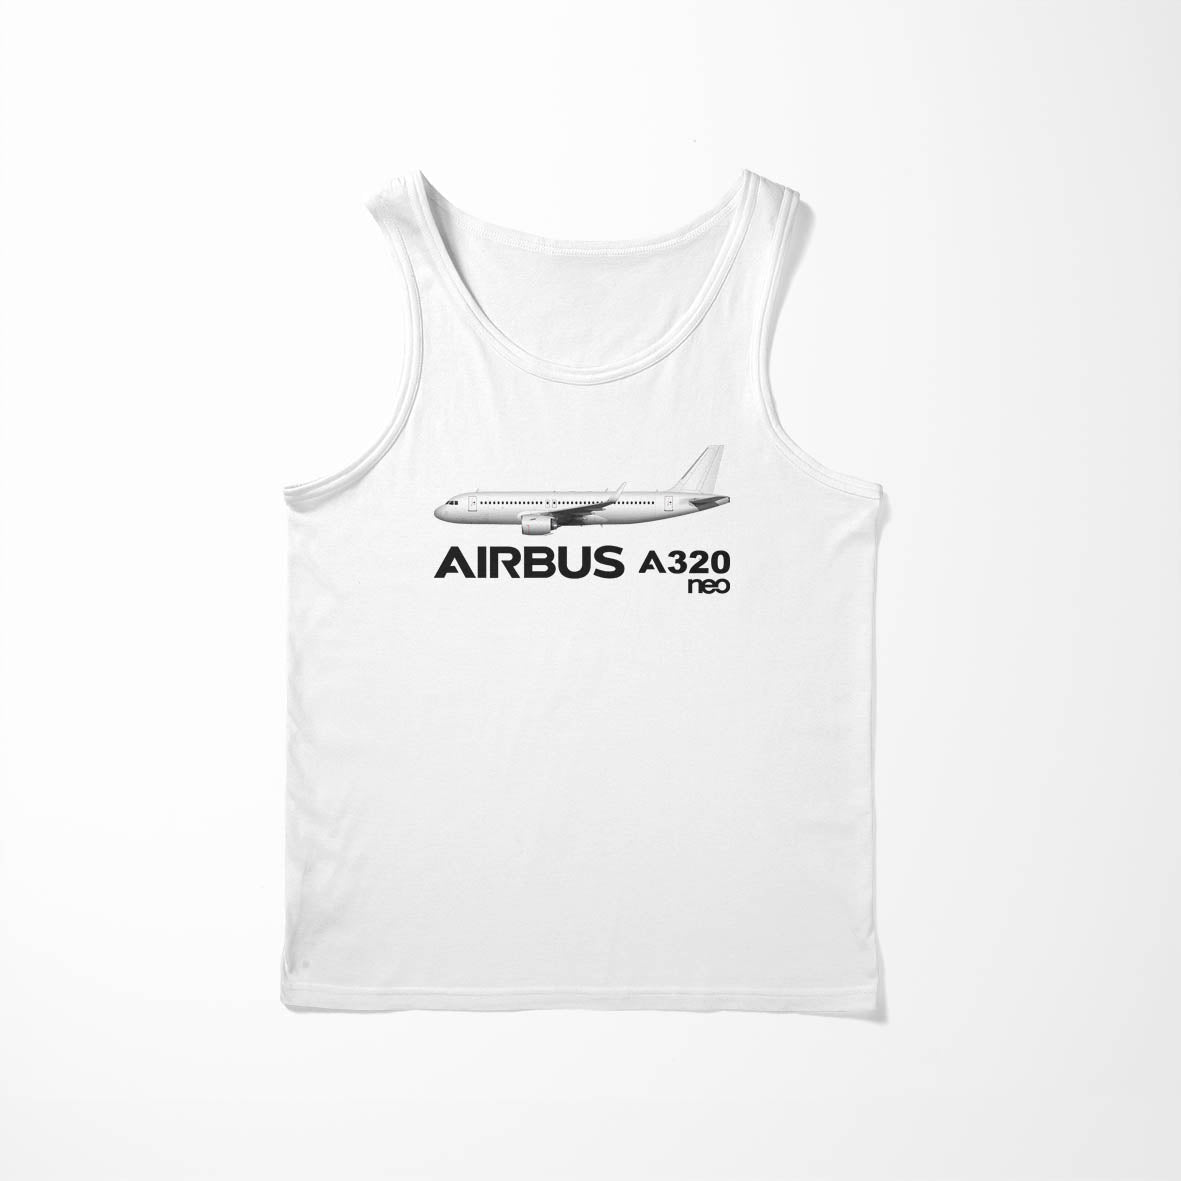 The Airbus A320Neo Designed Tank Tops